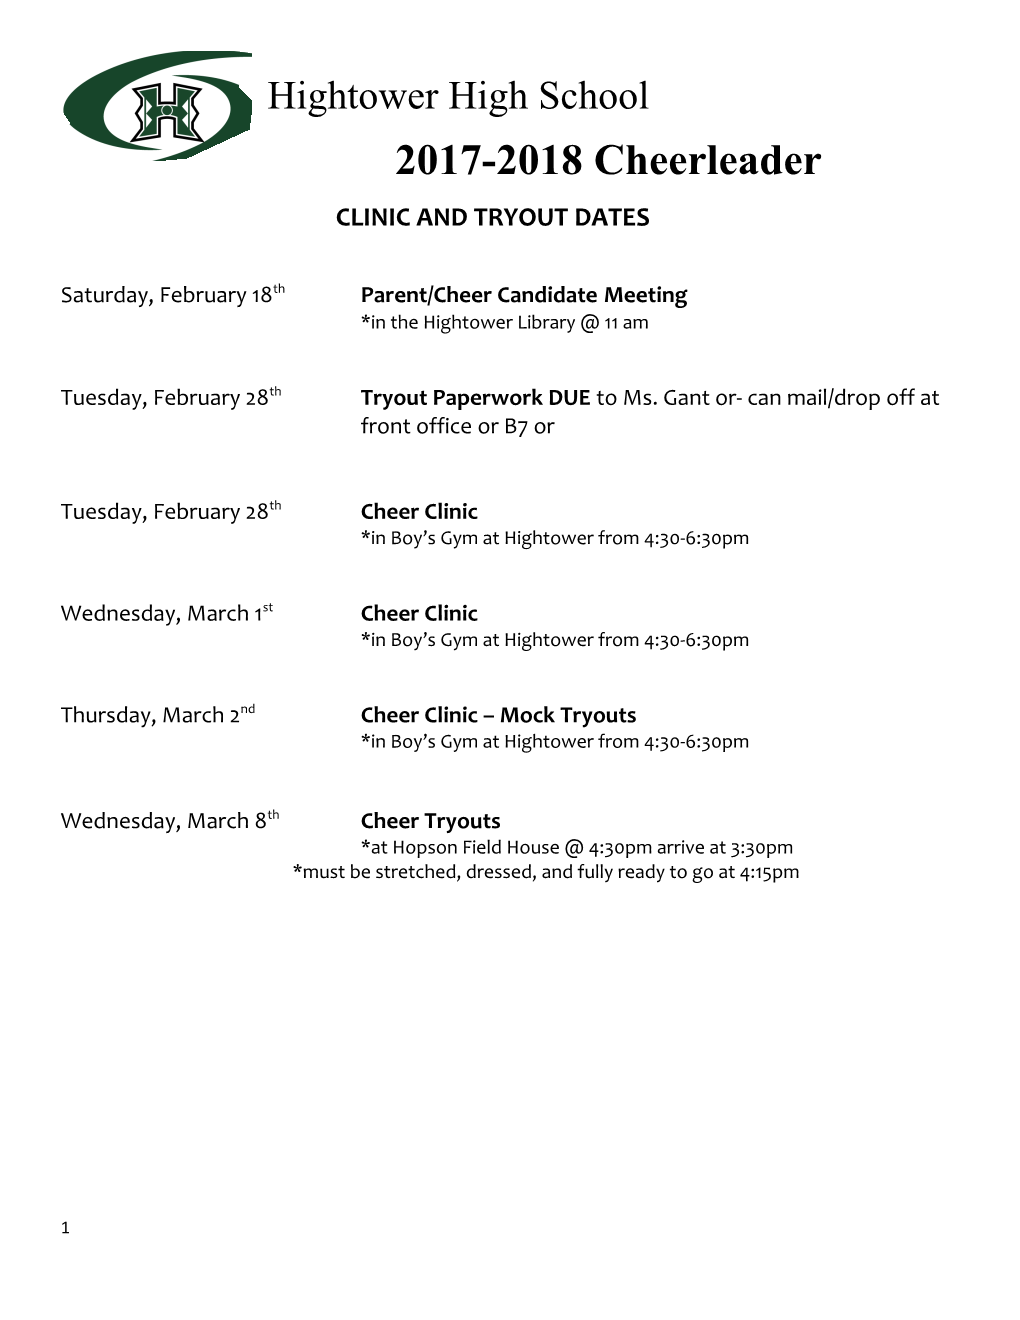 Clinic and Tryout Dates